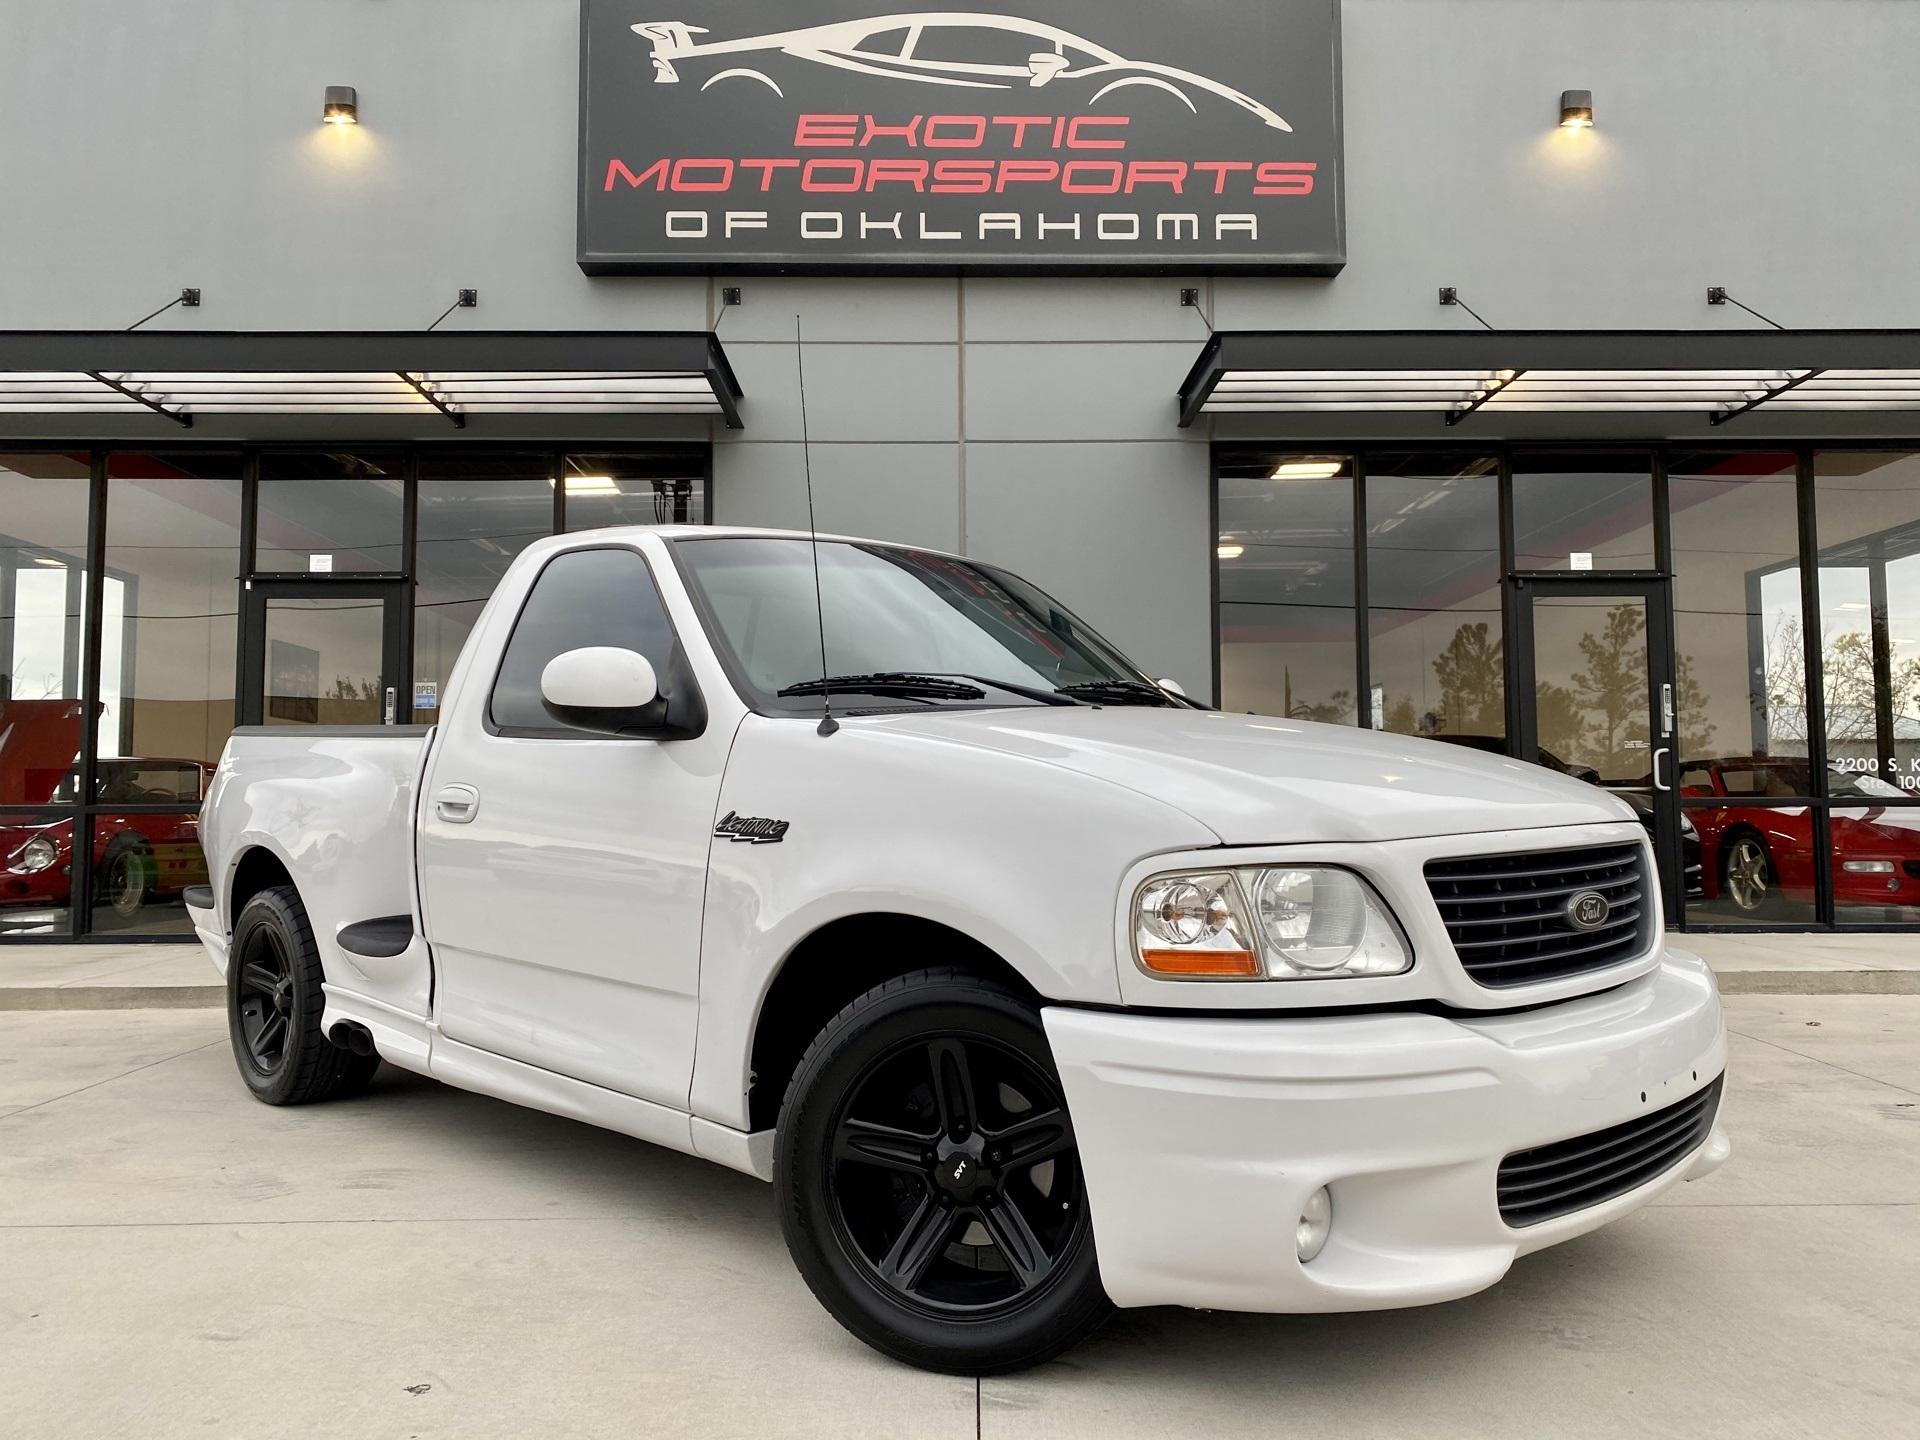 Used 2003 Ford F-150 Lightning For Sale (Sold) | Exotic Motorsports of